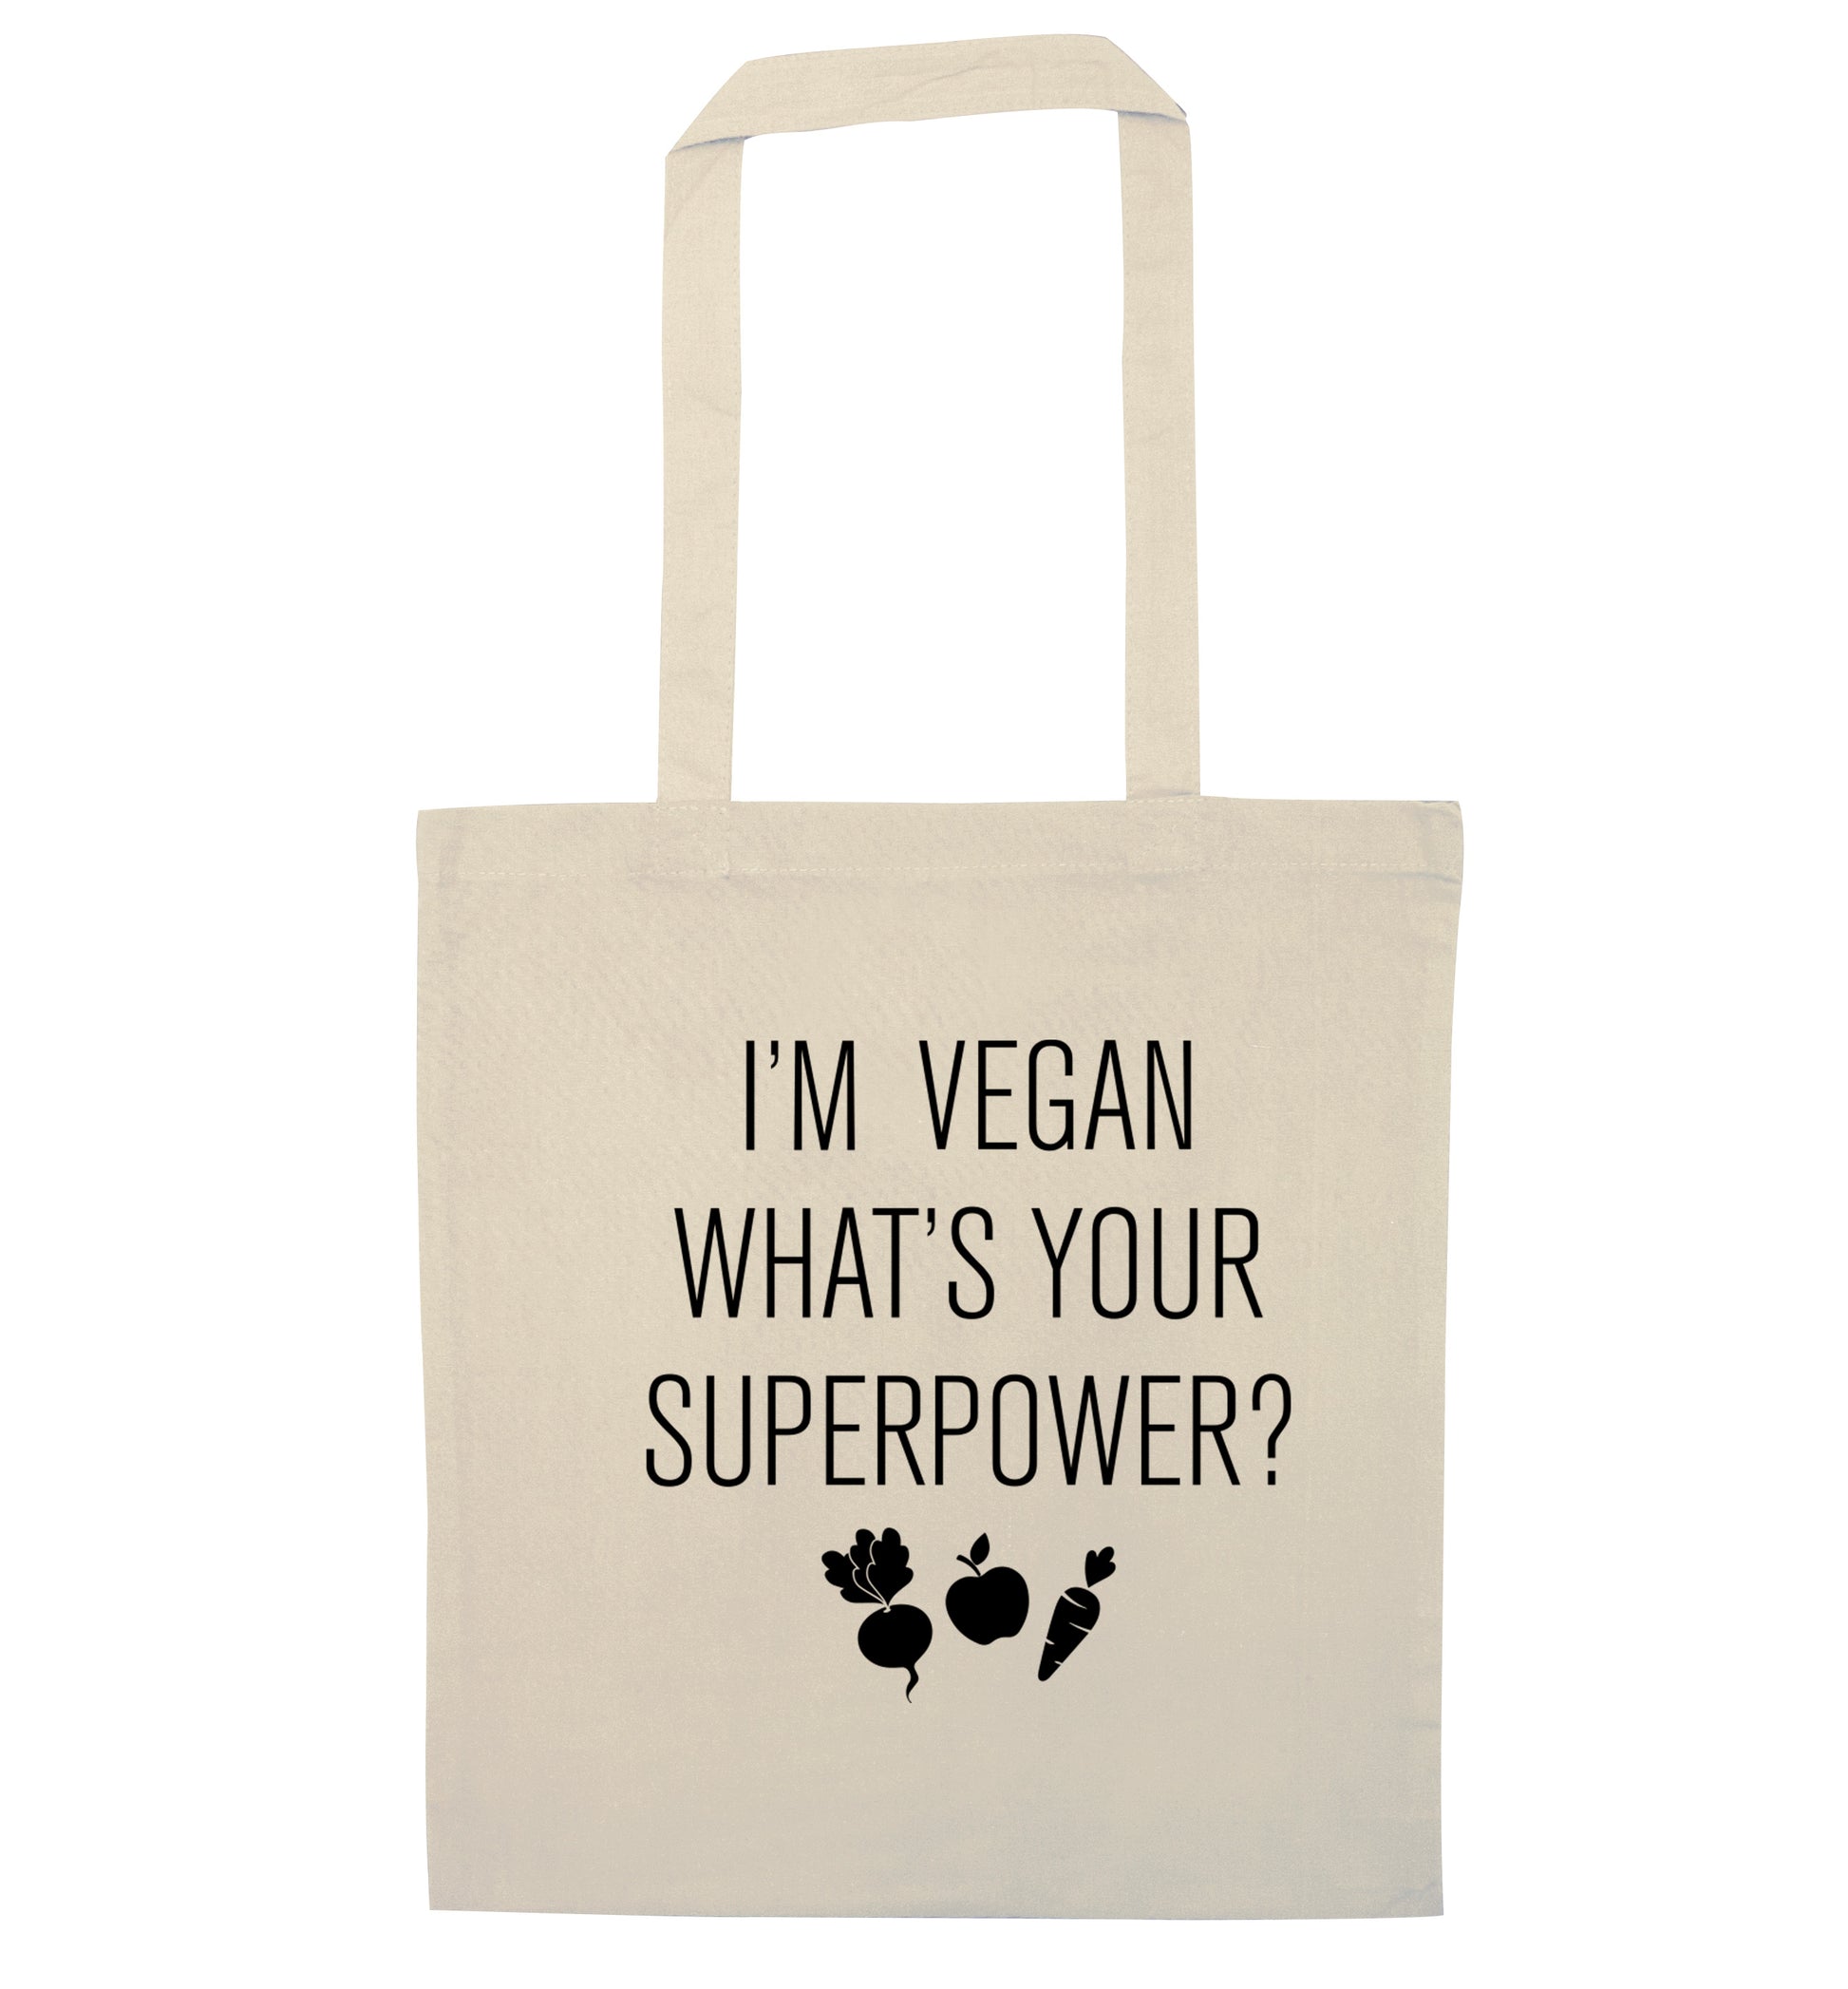 I'm Vegan What's Your Superpower? natural tote bag